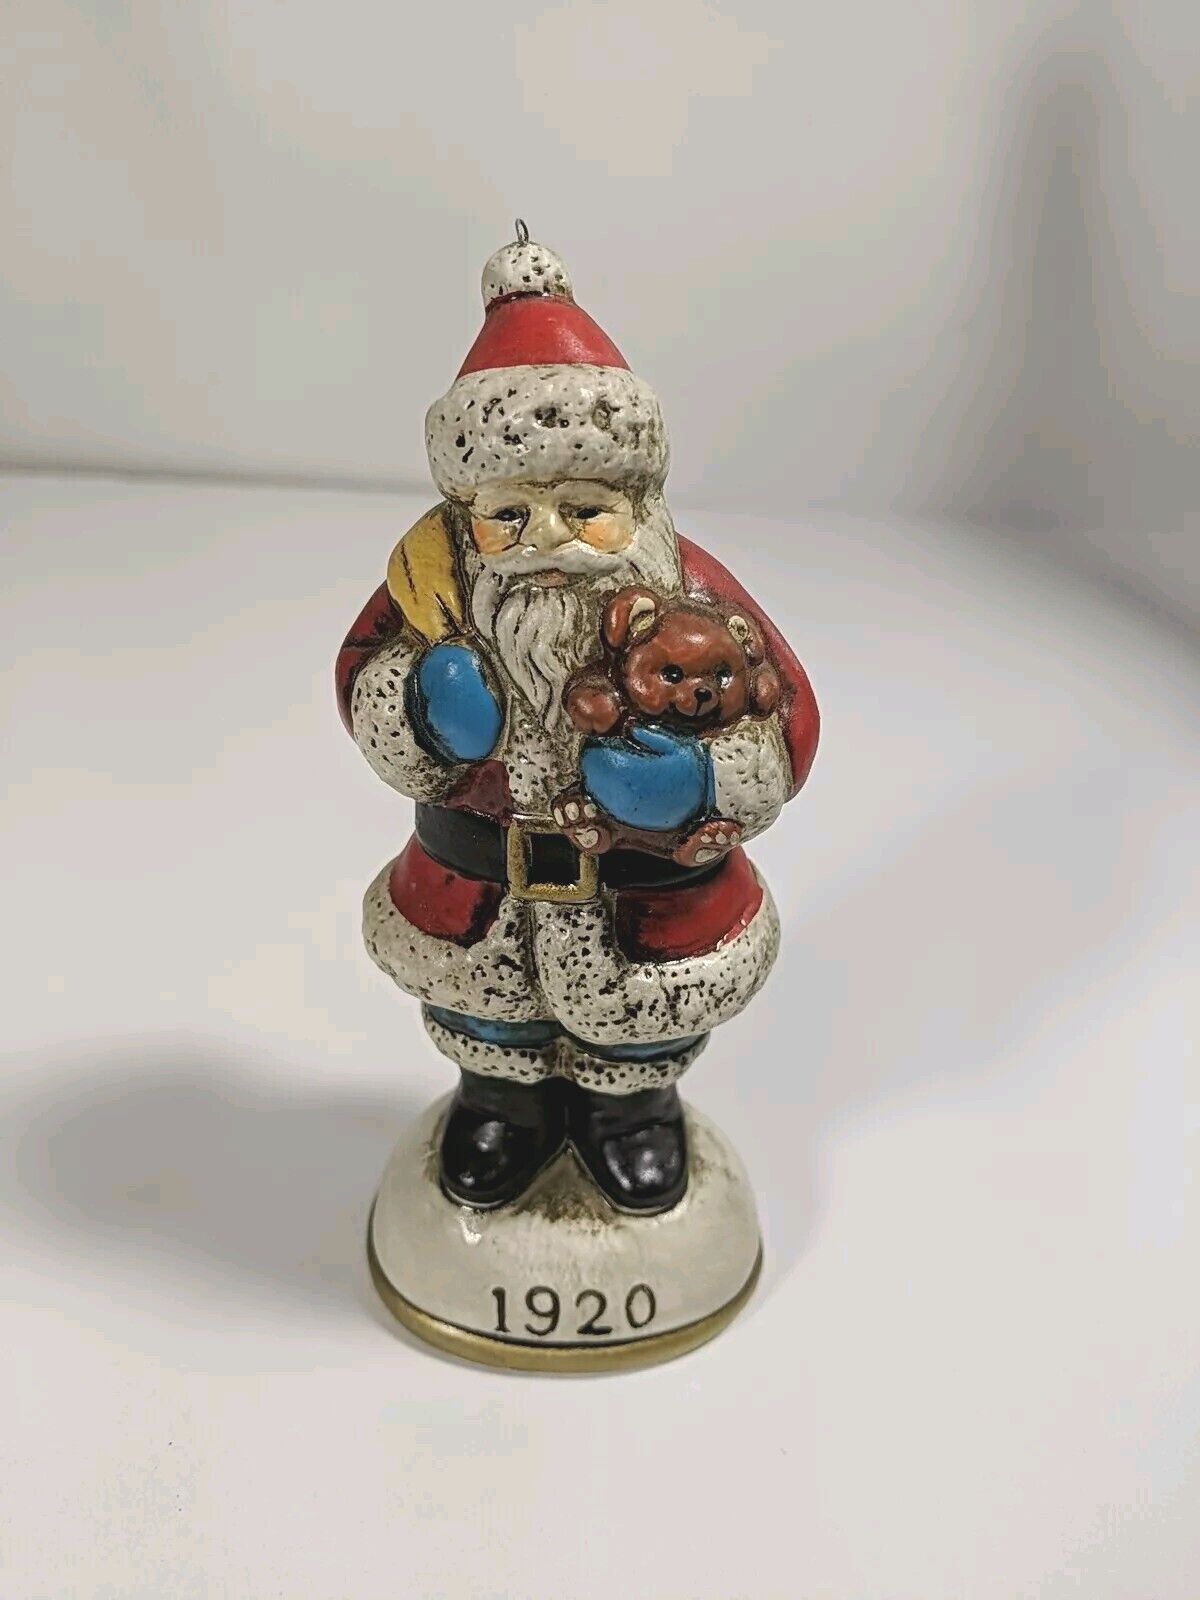 1984 Christmas Reproductions Collectible Santa Claus Figurine Ornamement 1925 